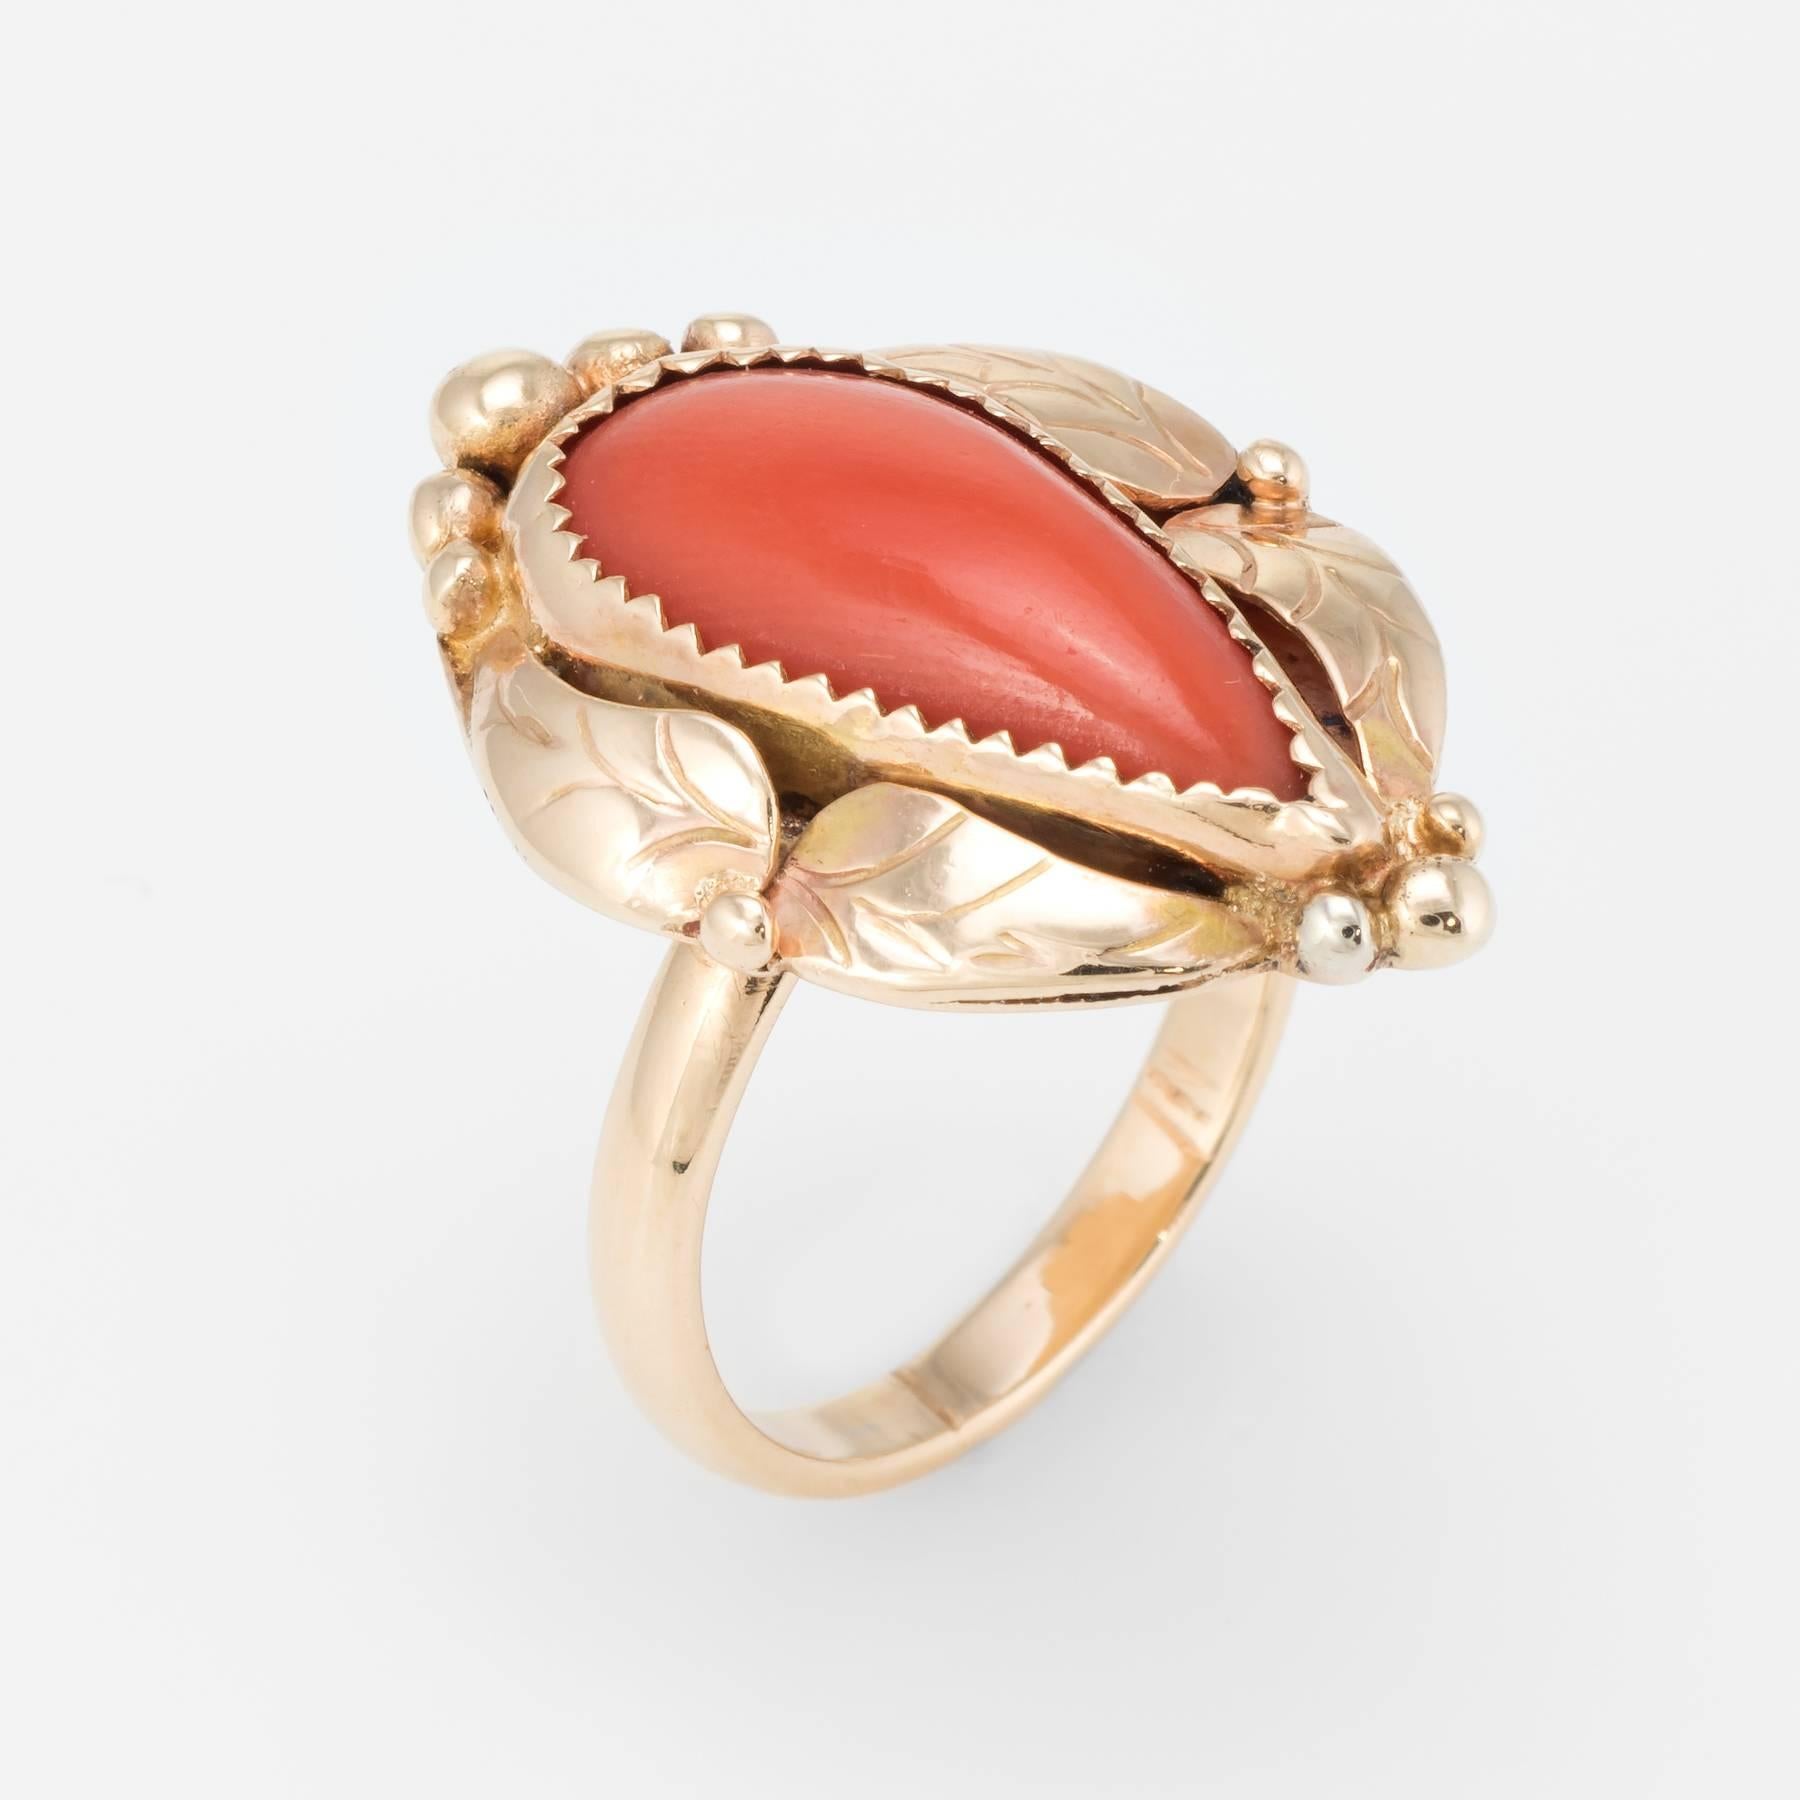 Elegant vintage cocktail ring (circa 1960s), crafted in 14 karat yellow gold. 

Centrally mounted cabochon cut Mediterranean Coral measures 16mm x 7mm (estimated at 3 carats). The coral is in excellent condition and free of cracks or chips.   

The